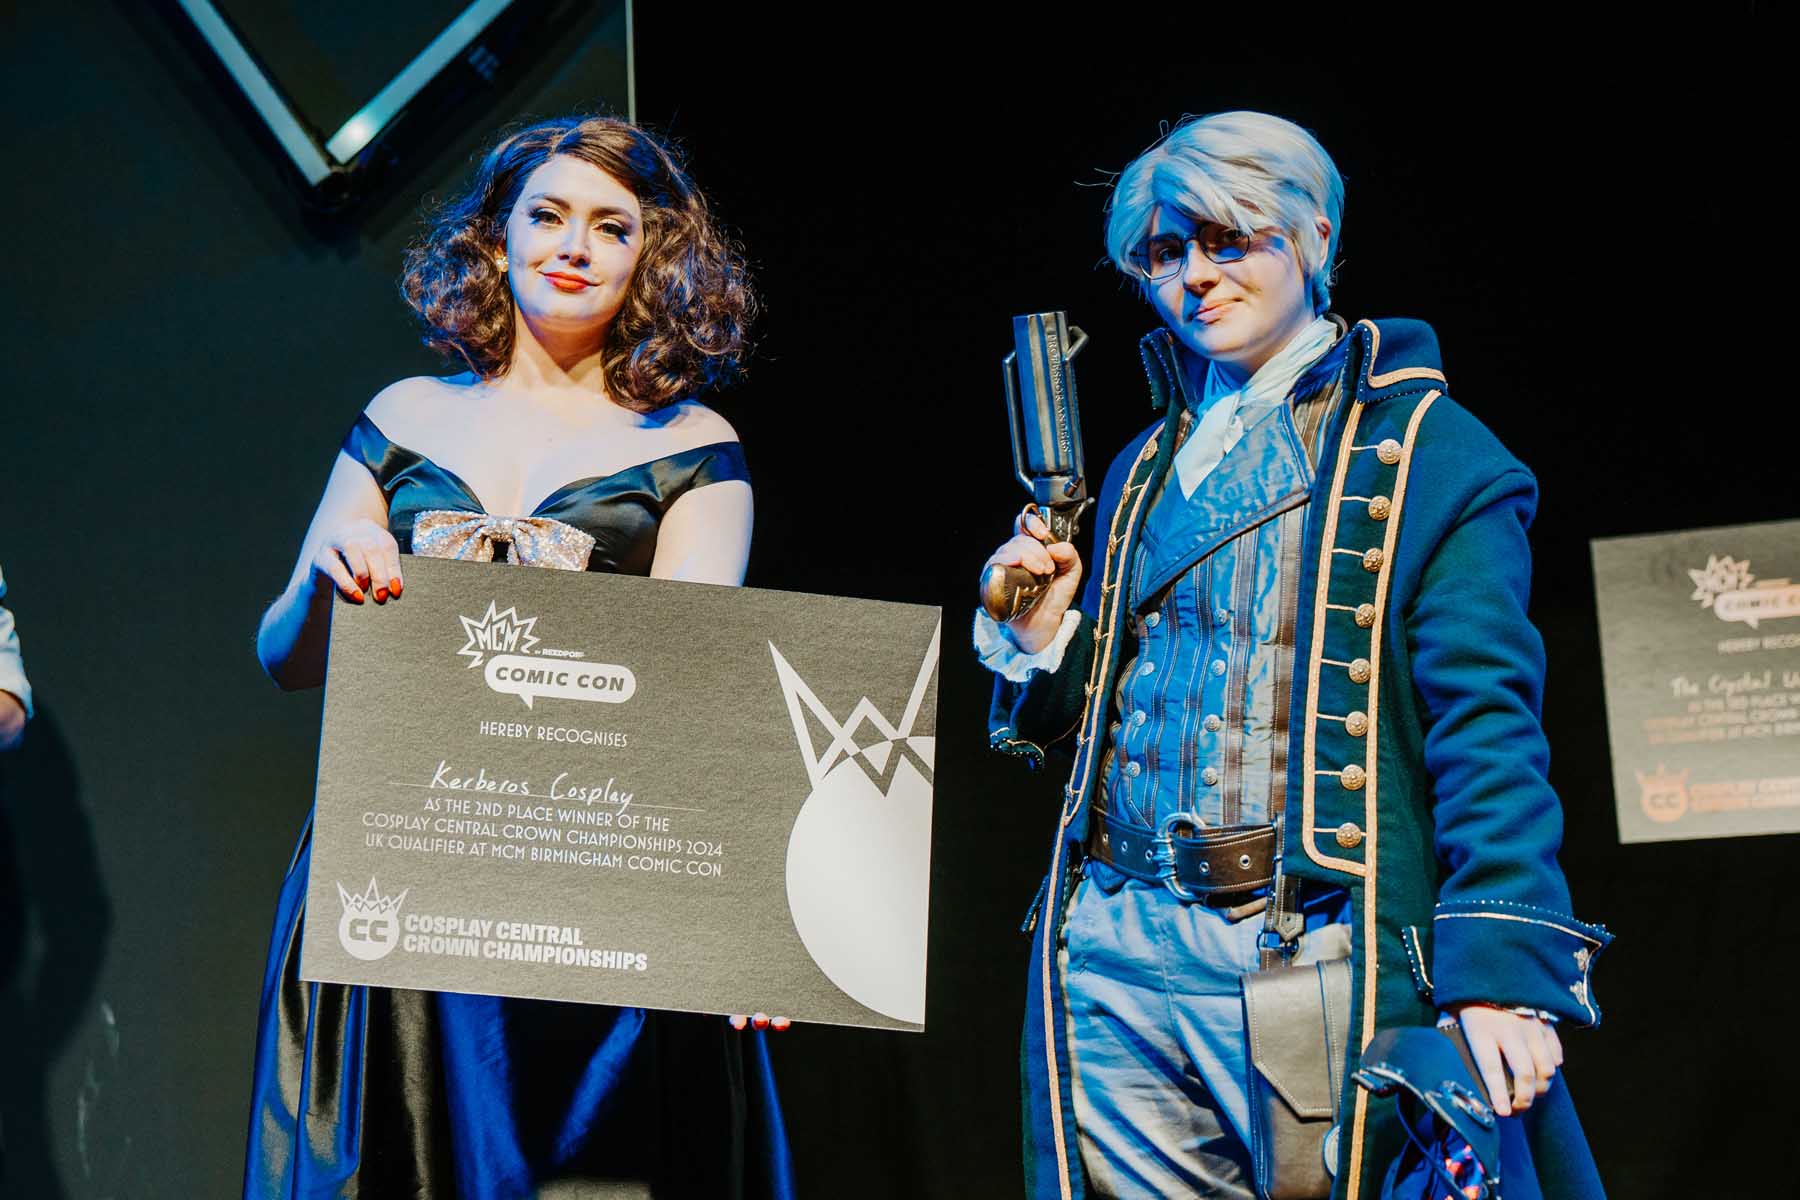 MCM Birmingham 2023 Cosplay Central Crown Championships UK Qualifiers